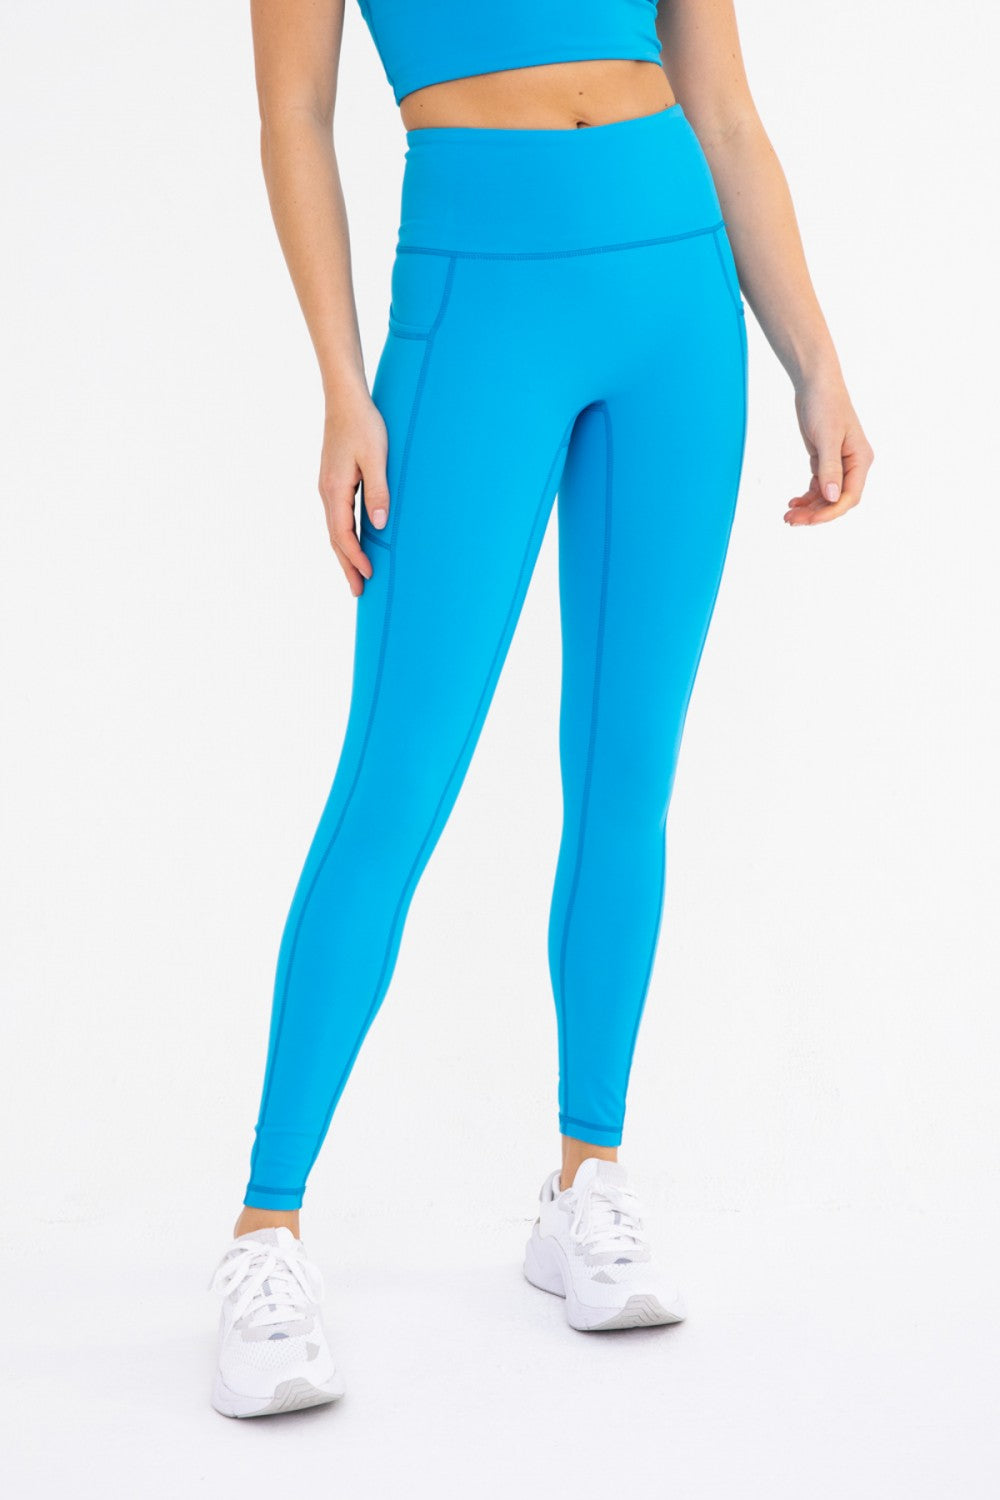 Venice High-Waist Leggings with Seam Details - APH-A0883 – The